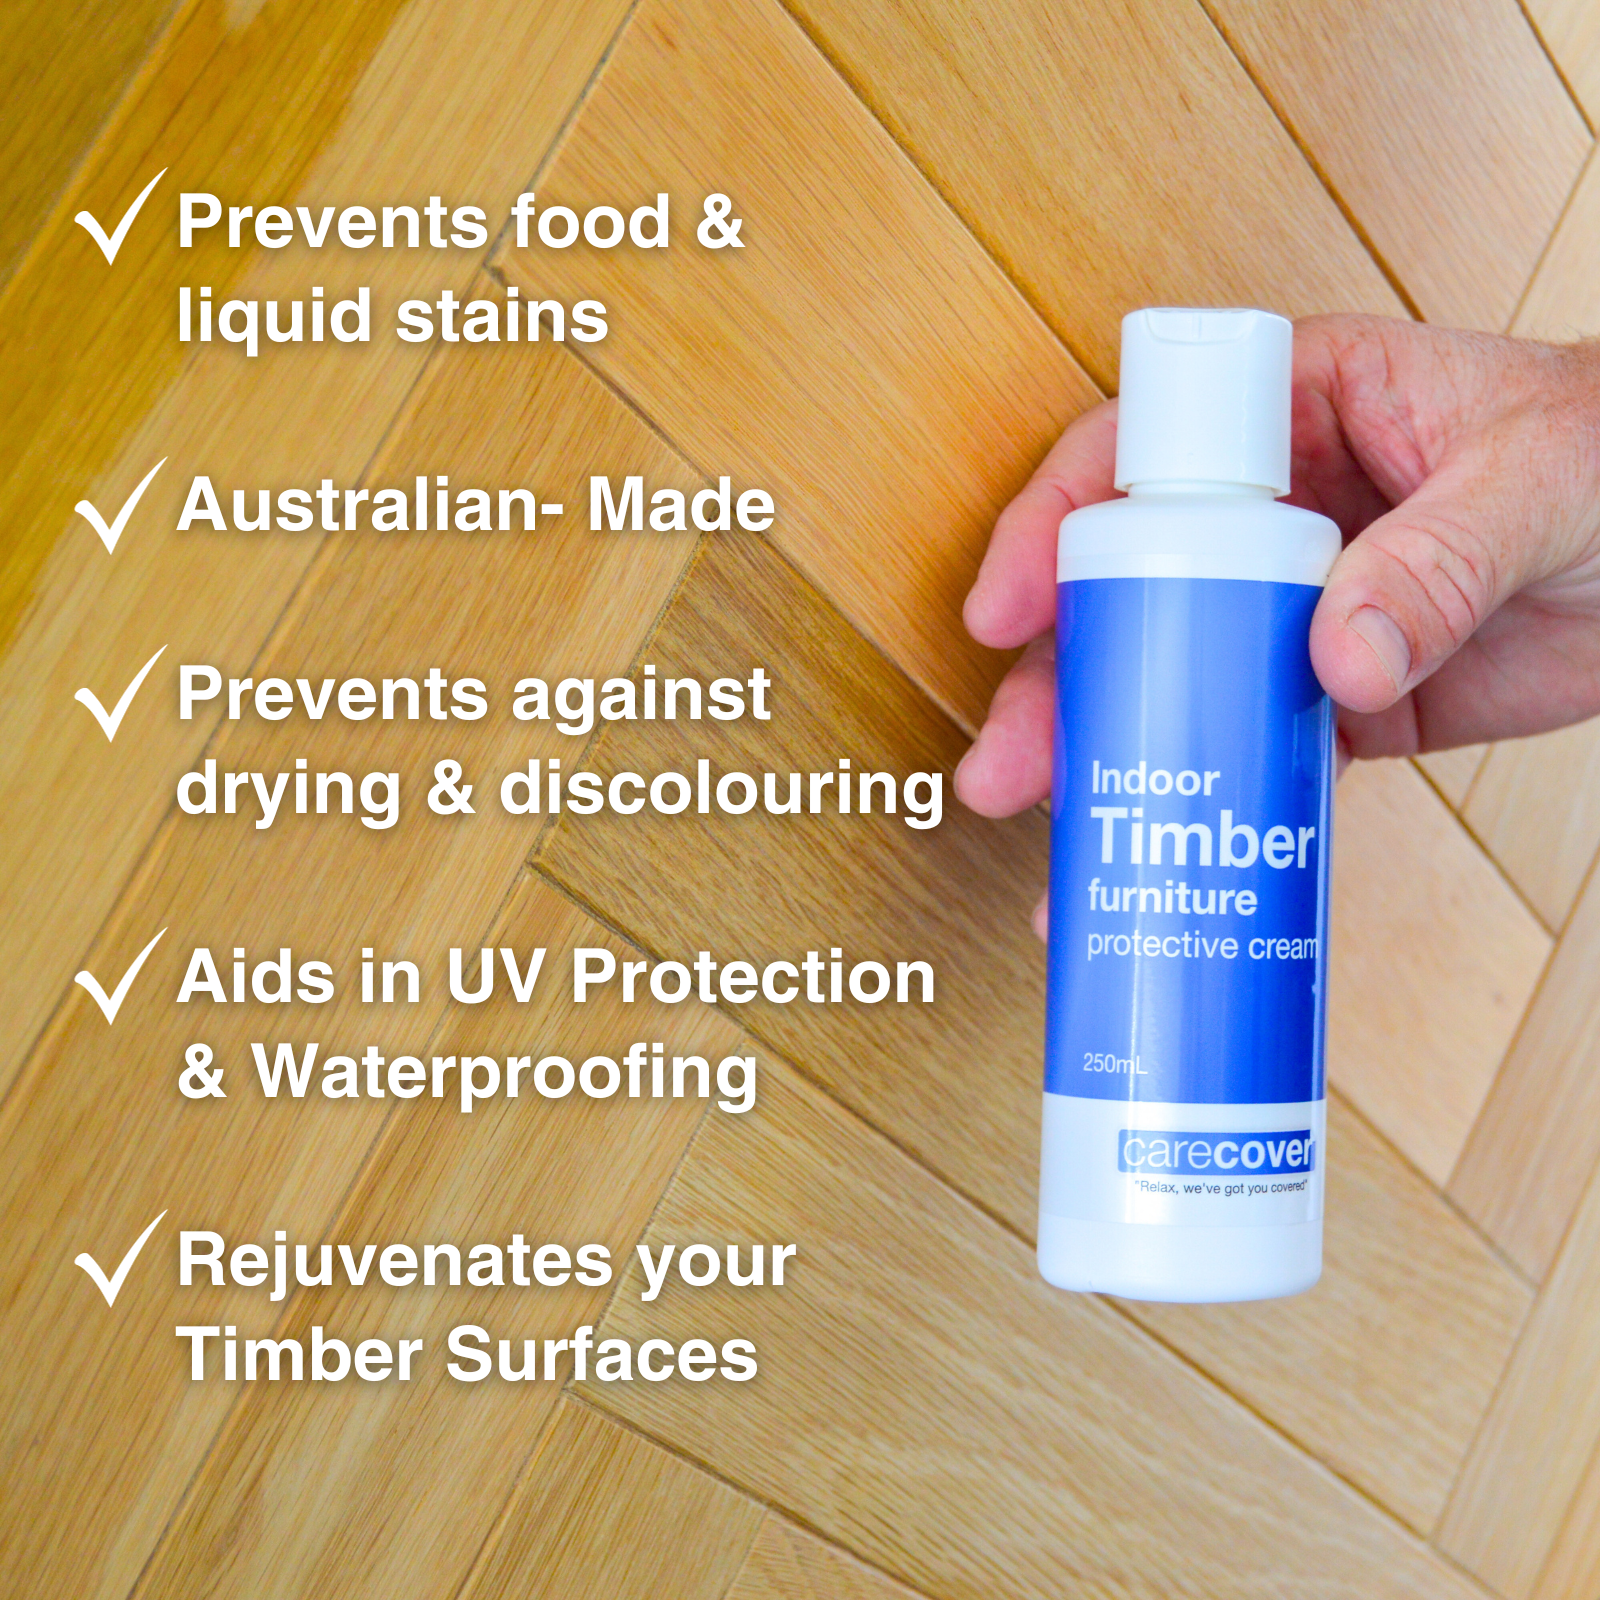 Timber Furniture Protective Cream by Care Cover Australia